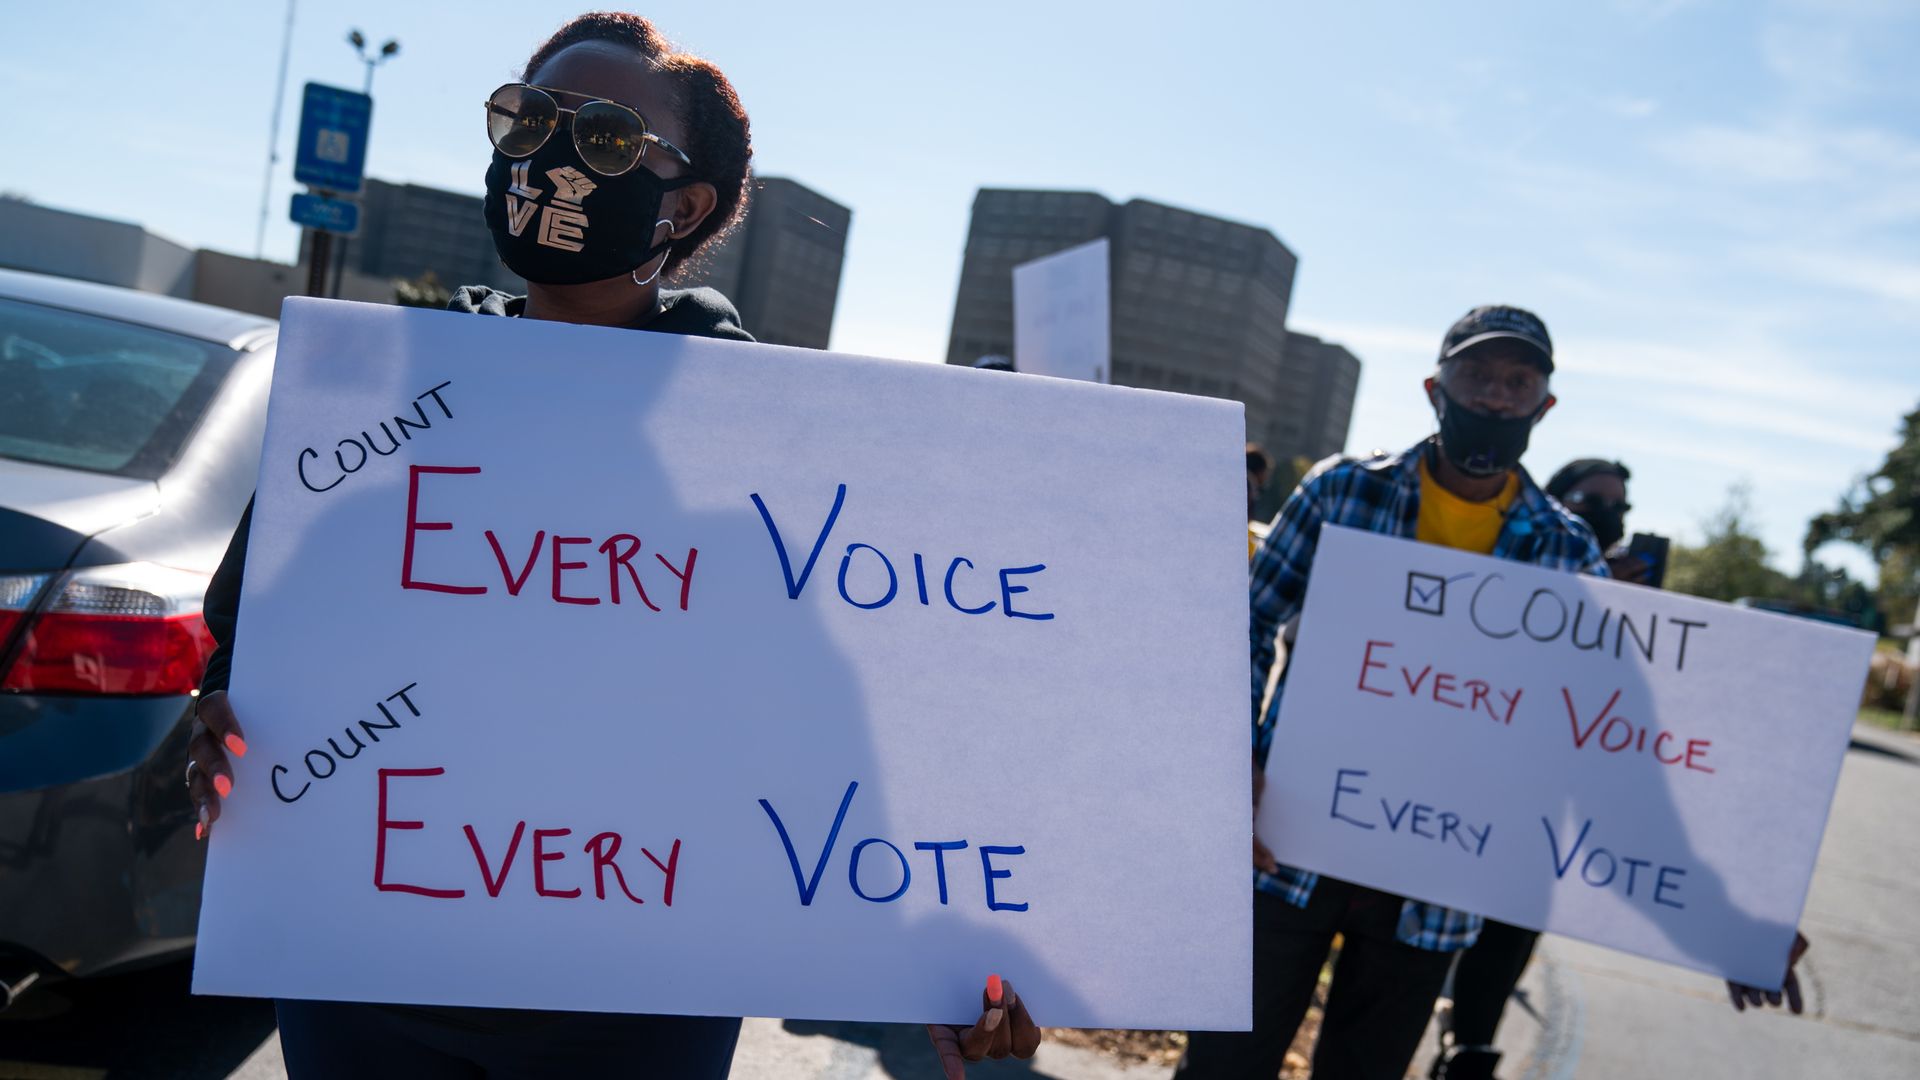 Protesters hold "Count Every Voice, Count Every Vote" signs during the 2020 Presidential election outside the Dekalb County Voter Registration and Elections Office.